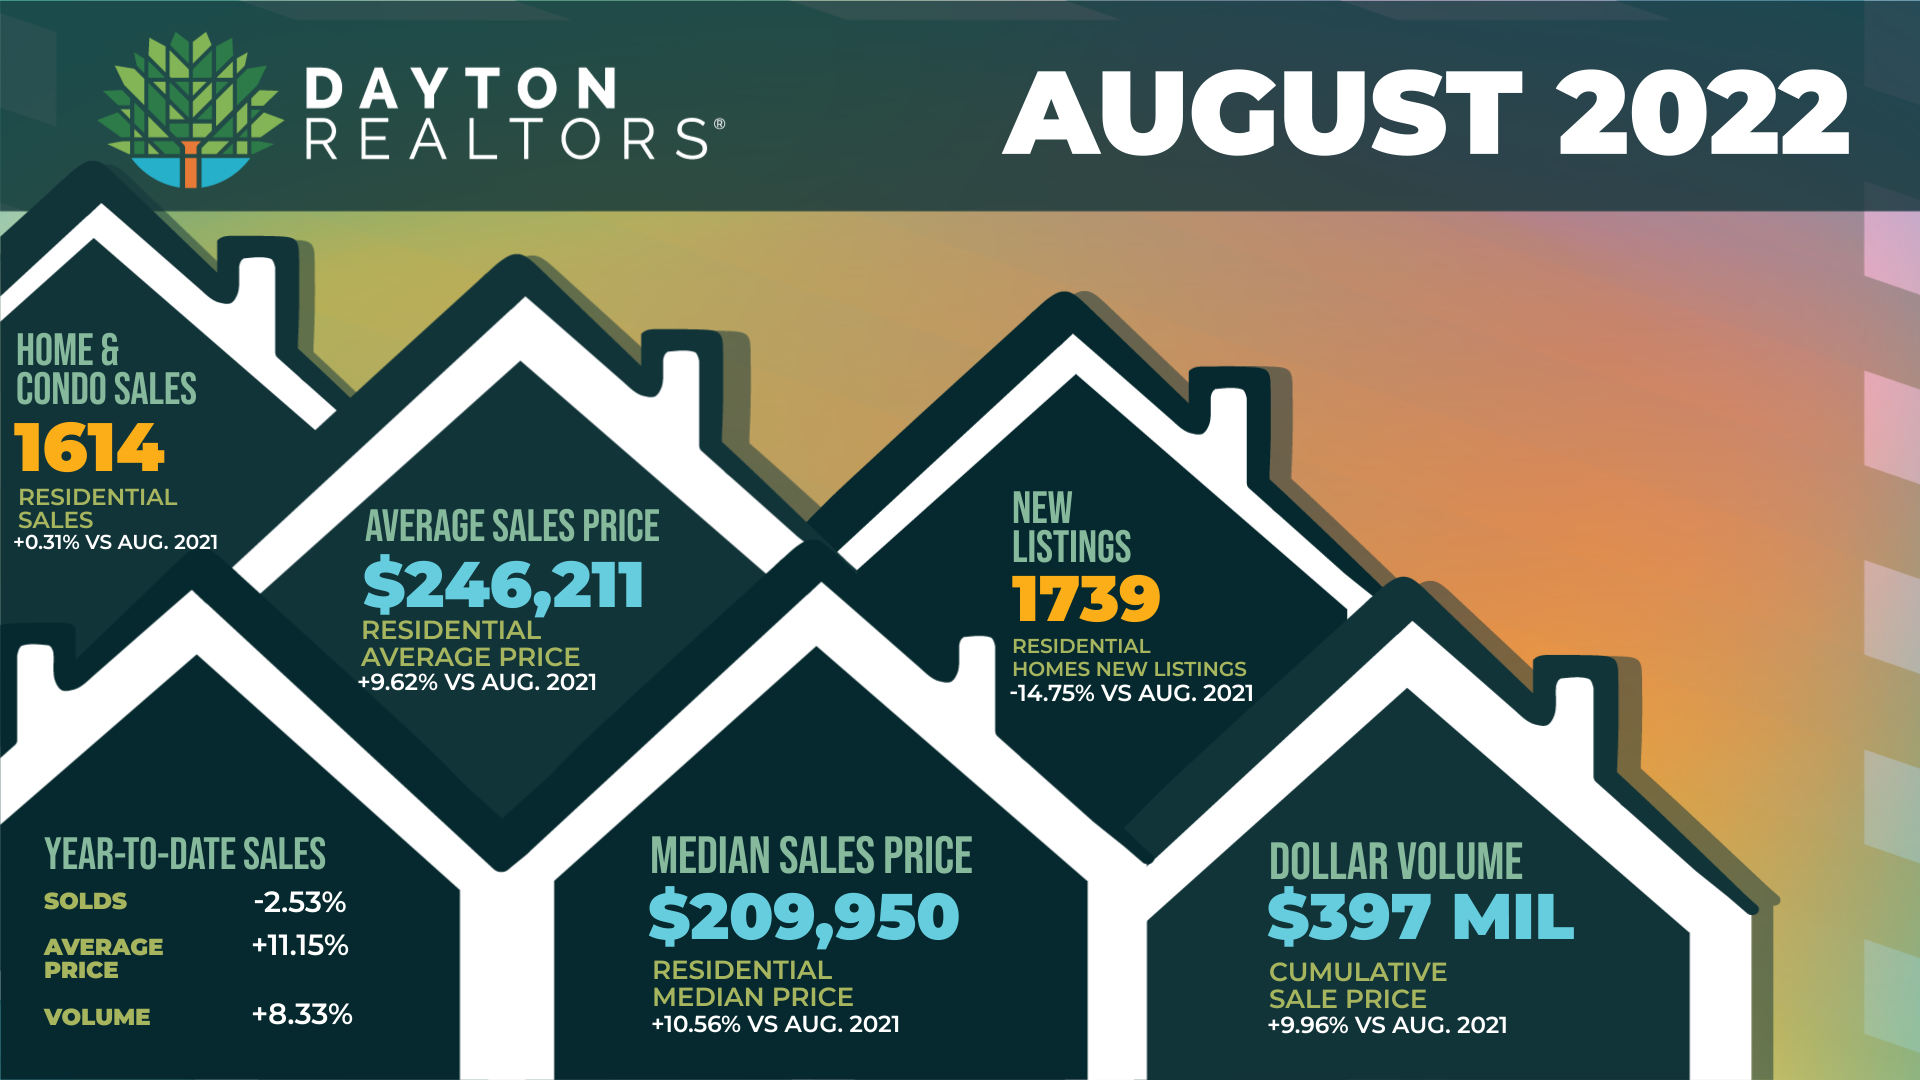 Dayton Area Home Sales for August 2022